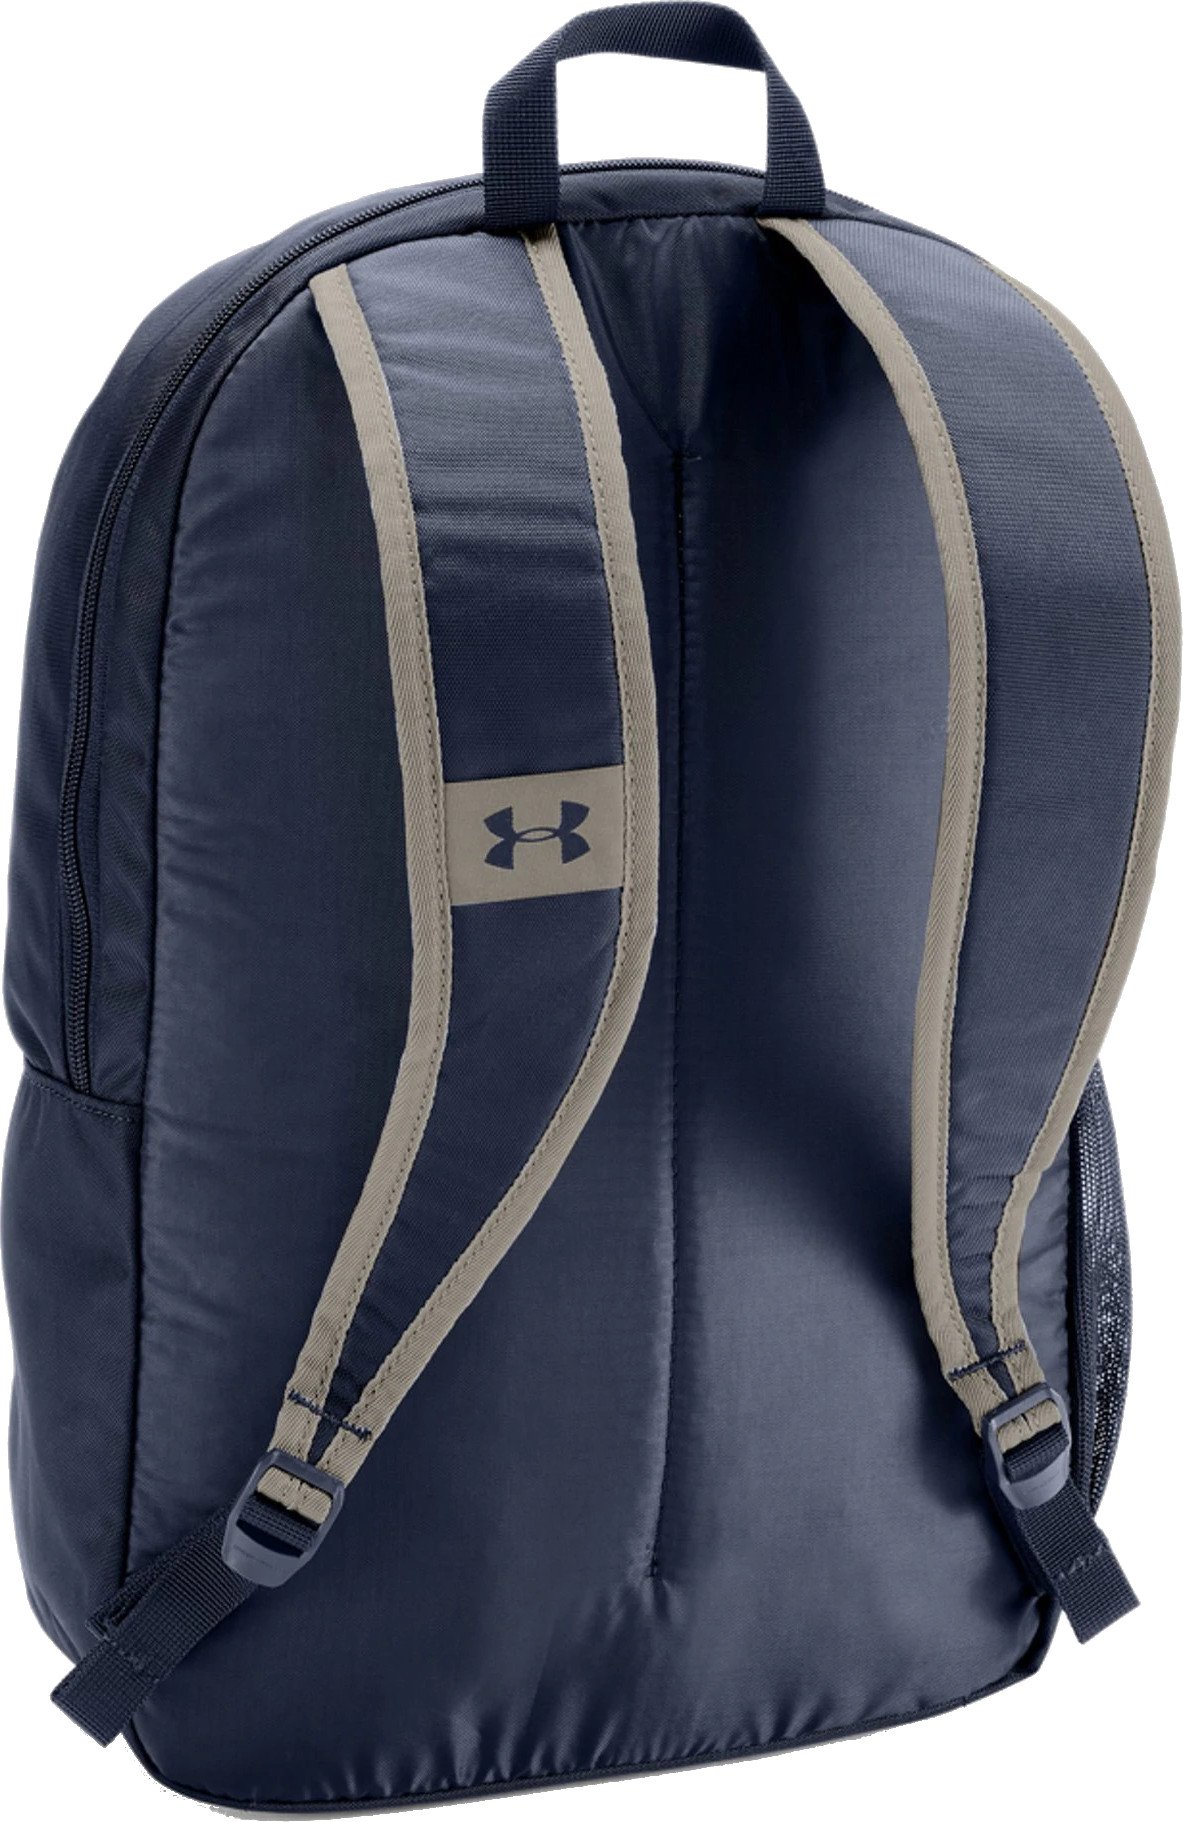 under armour backpack project 5